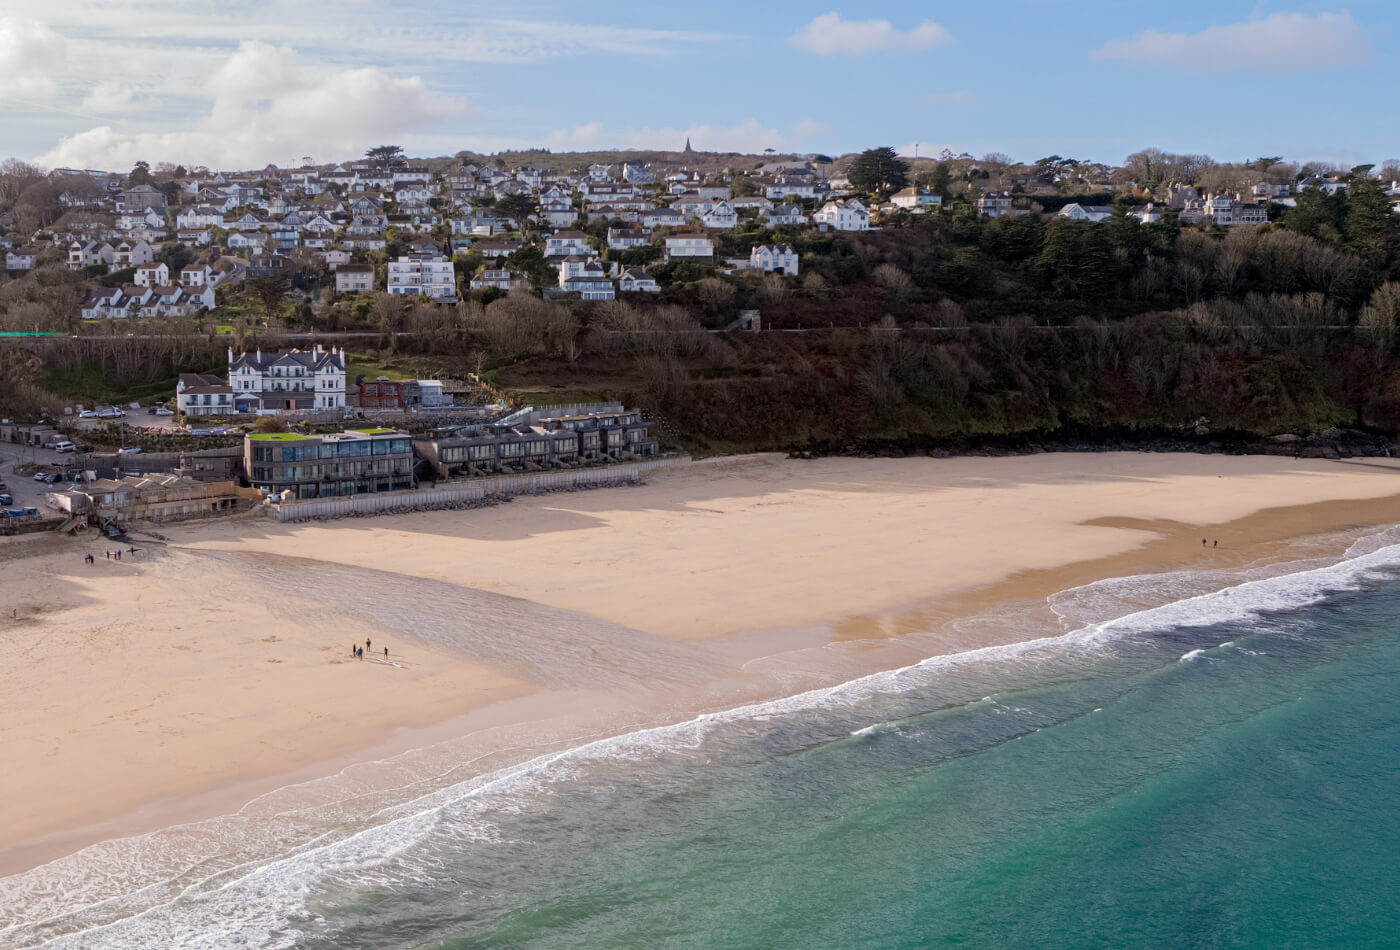 Carbis Bay Beach in Carbis Bay, St Ives, Cornwall, UK.